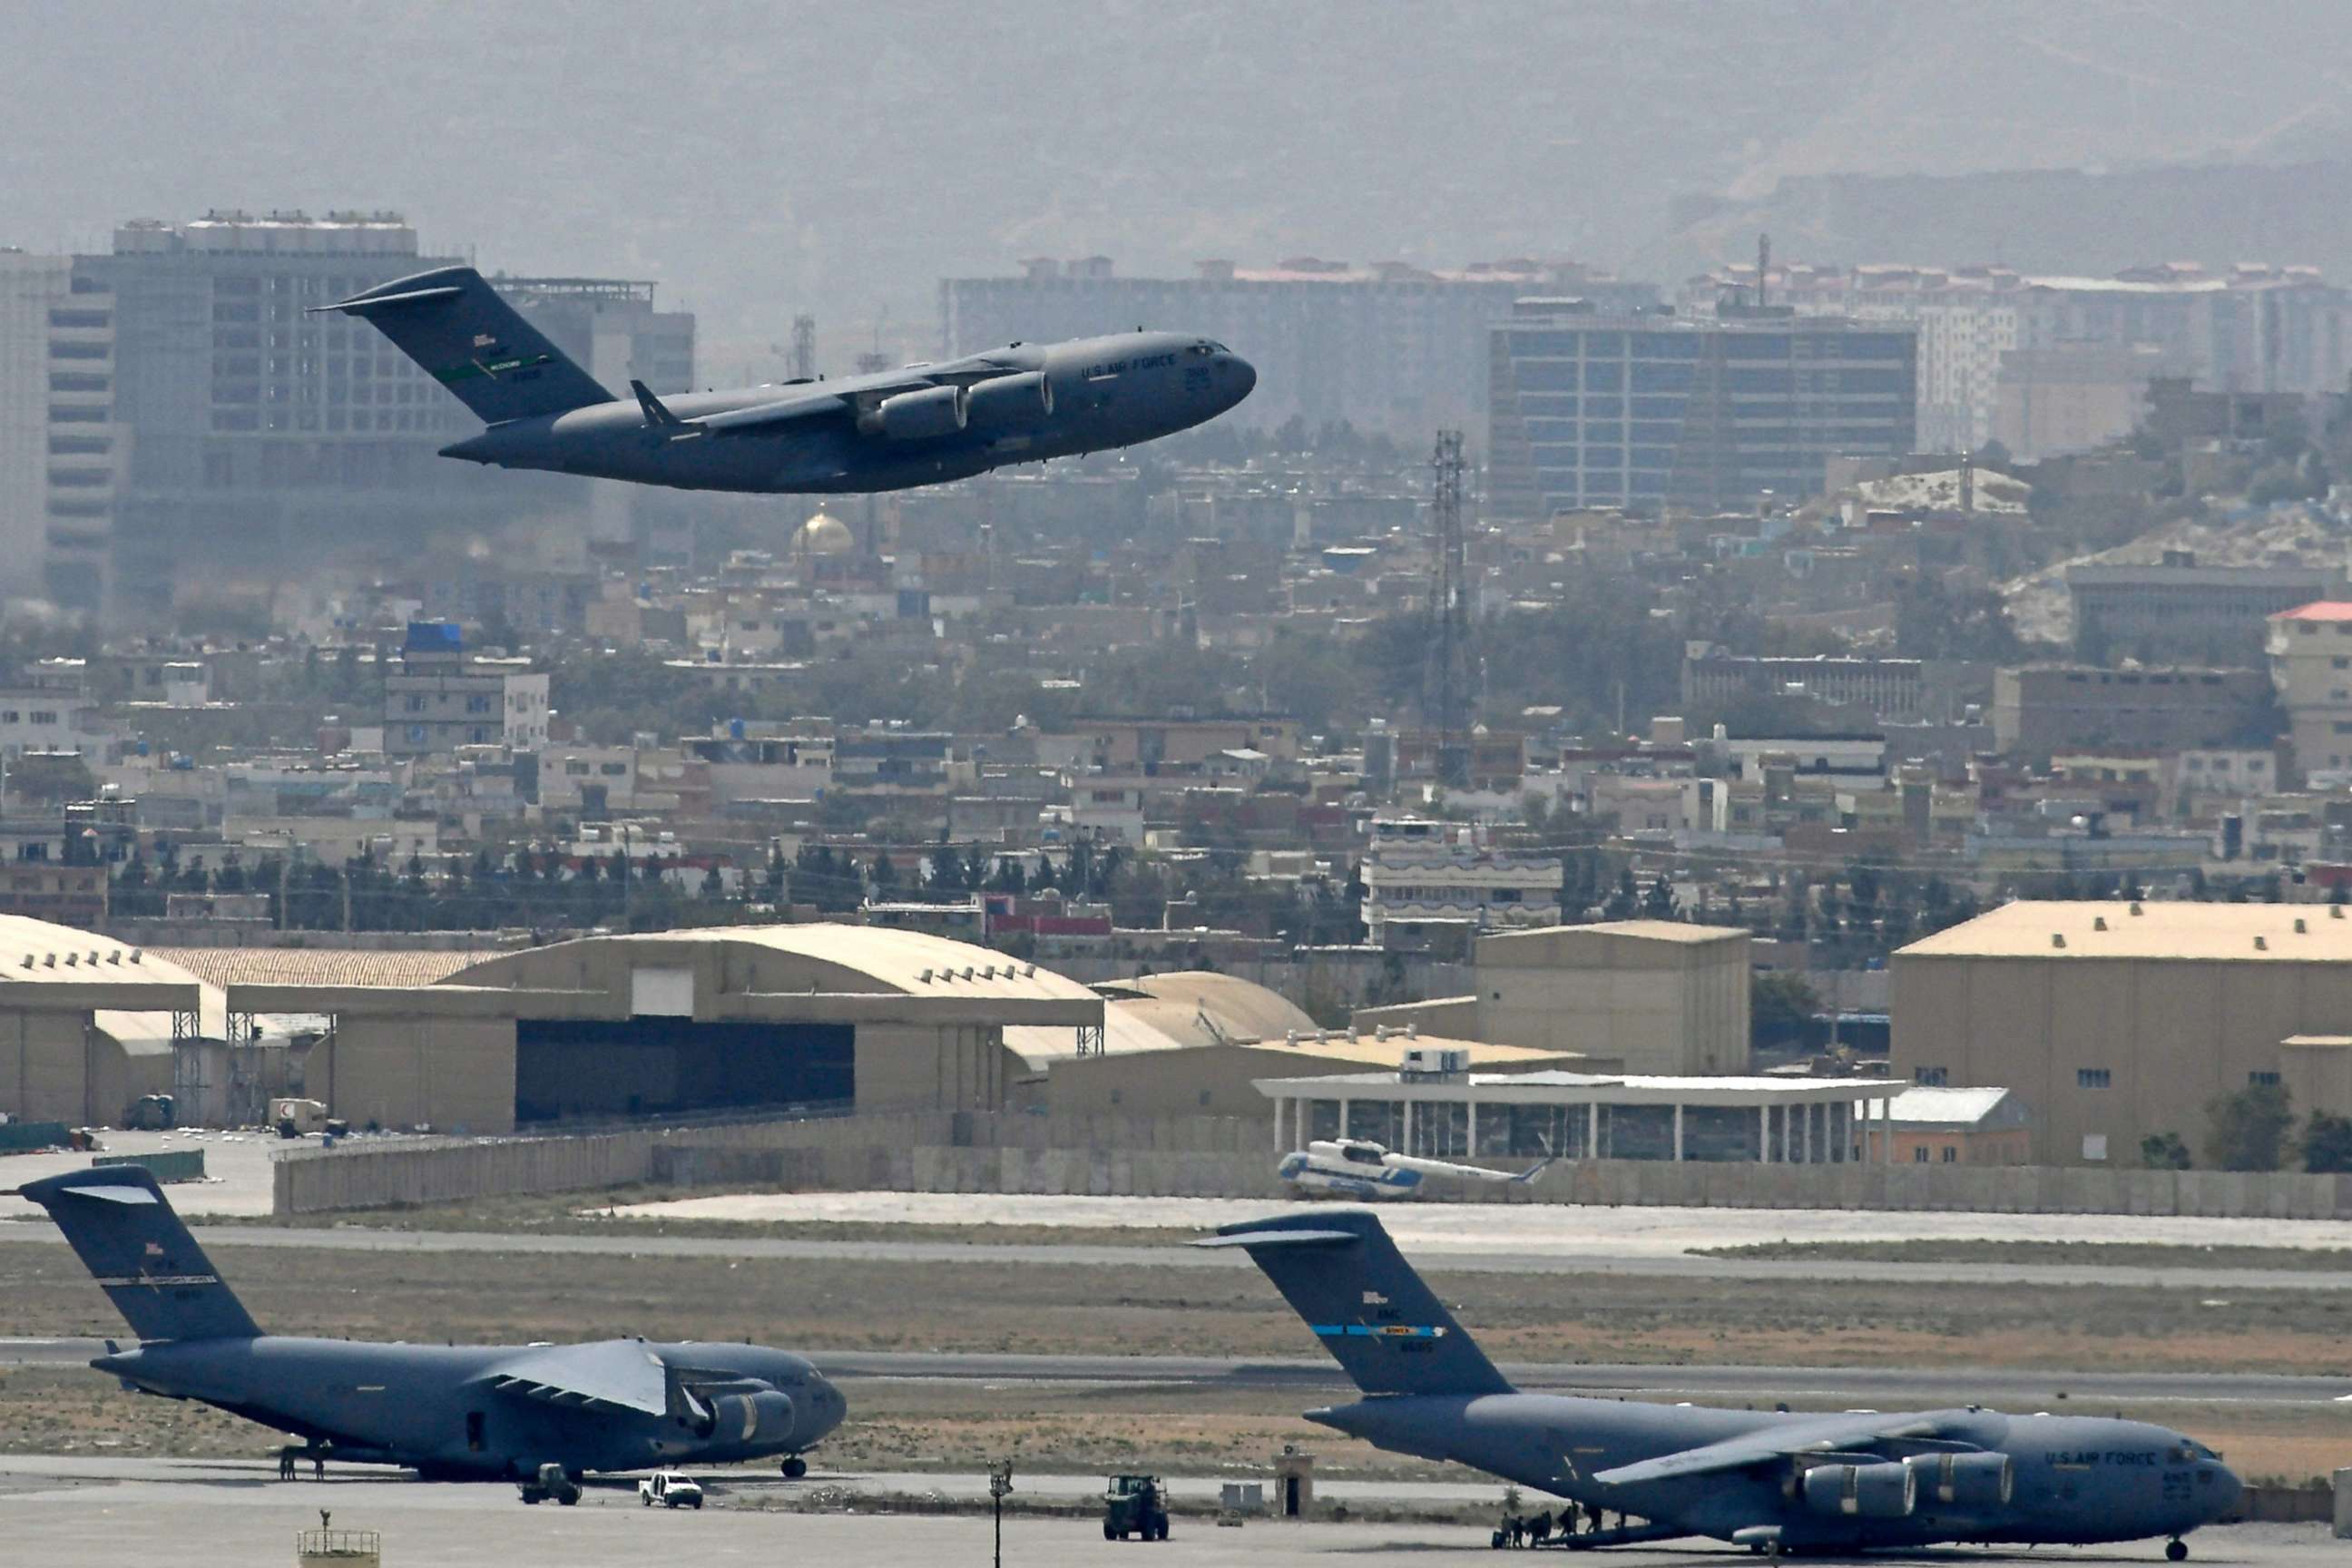 PHOTO: A U.S. Air Force aircraft takes off from the airport in Kabul, Afghanistan, on Aug. 30, 2021.